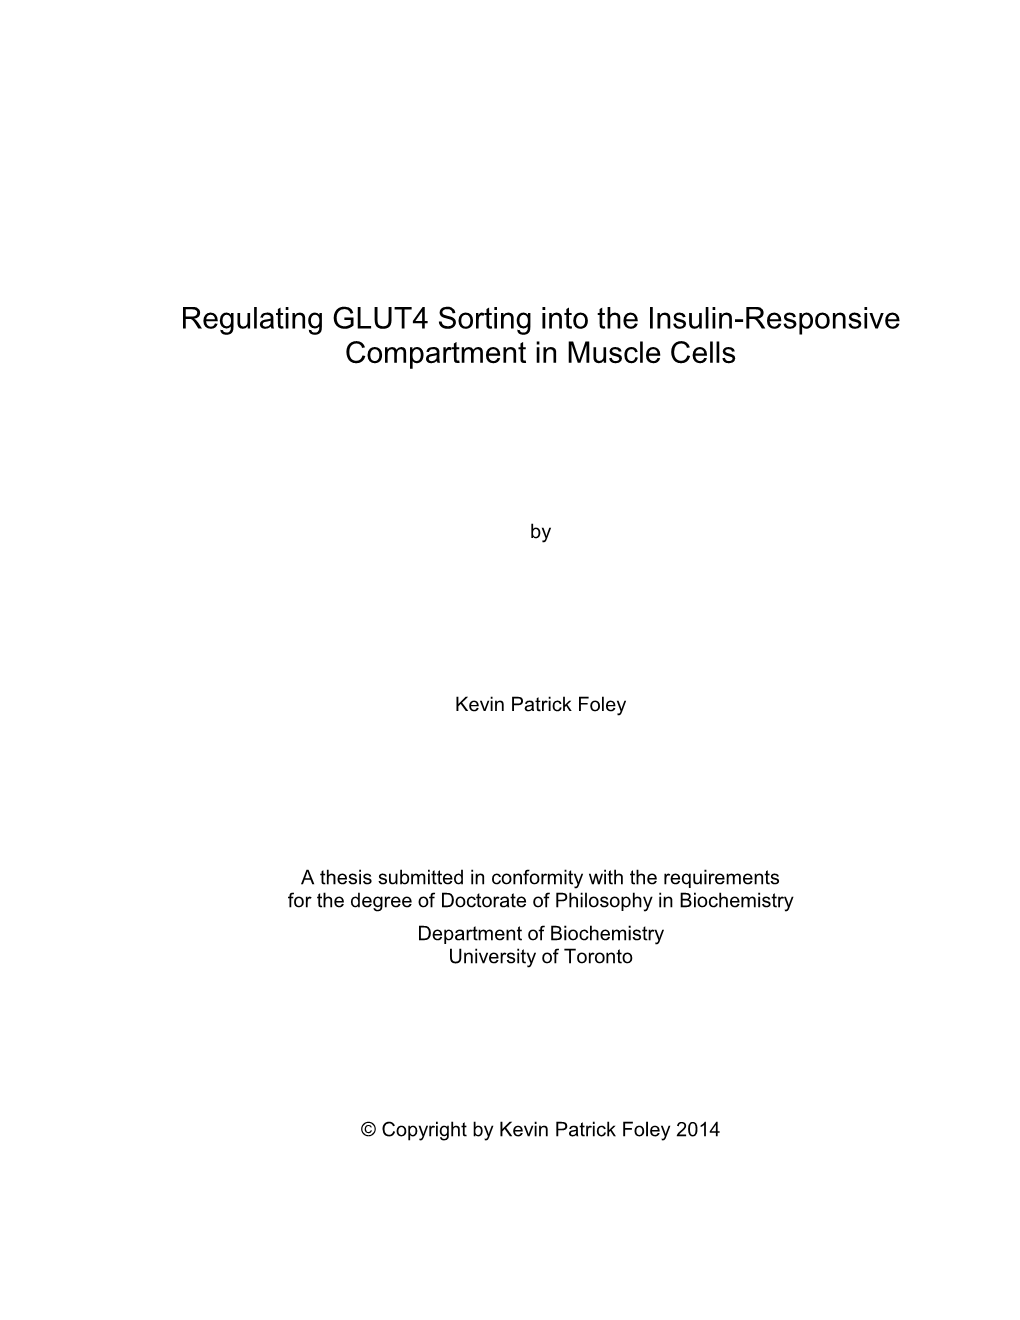 Regulating GLUT4 Sorting Into the Insulin-Responsive Compartment in Muscle Cells